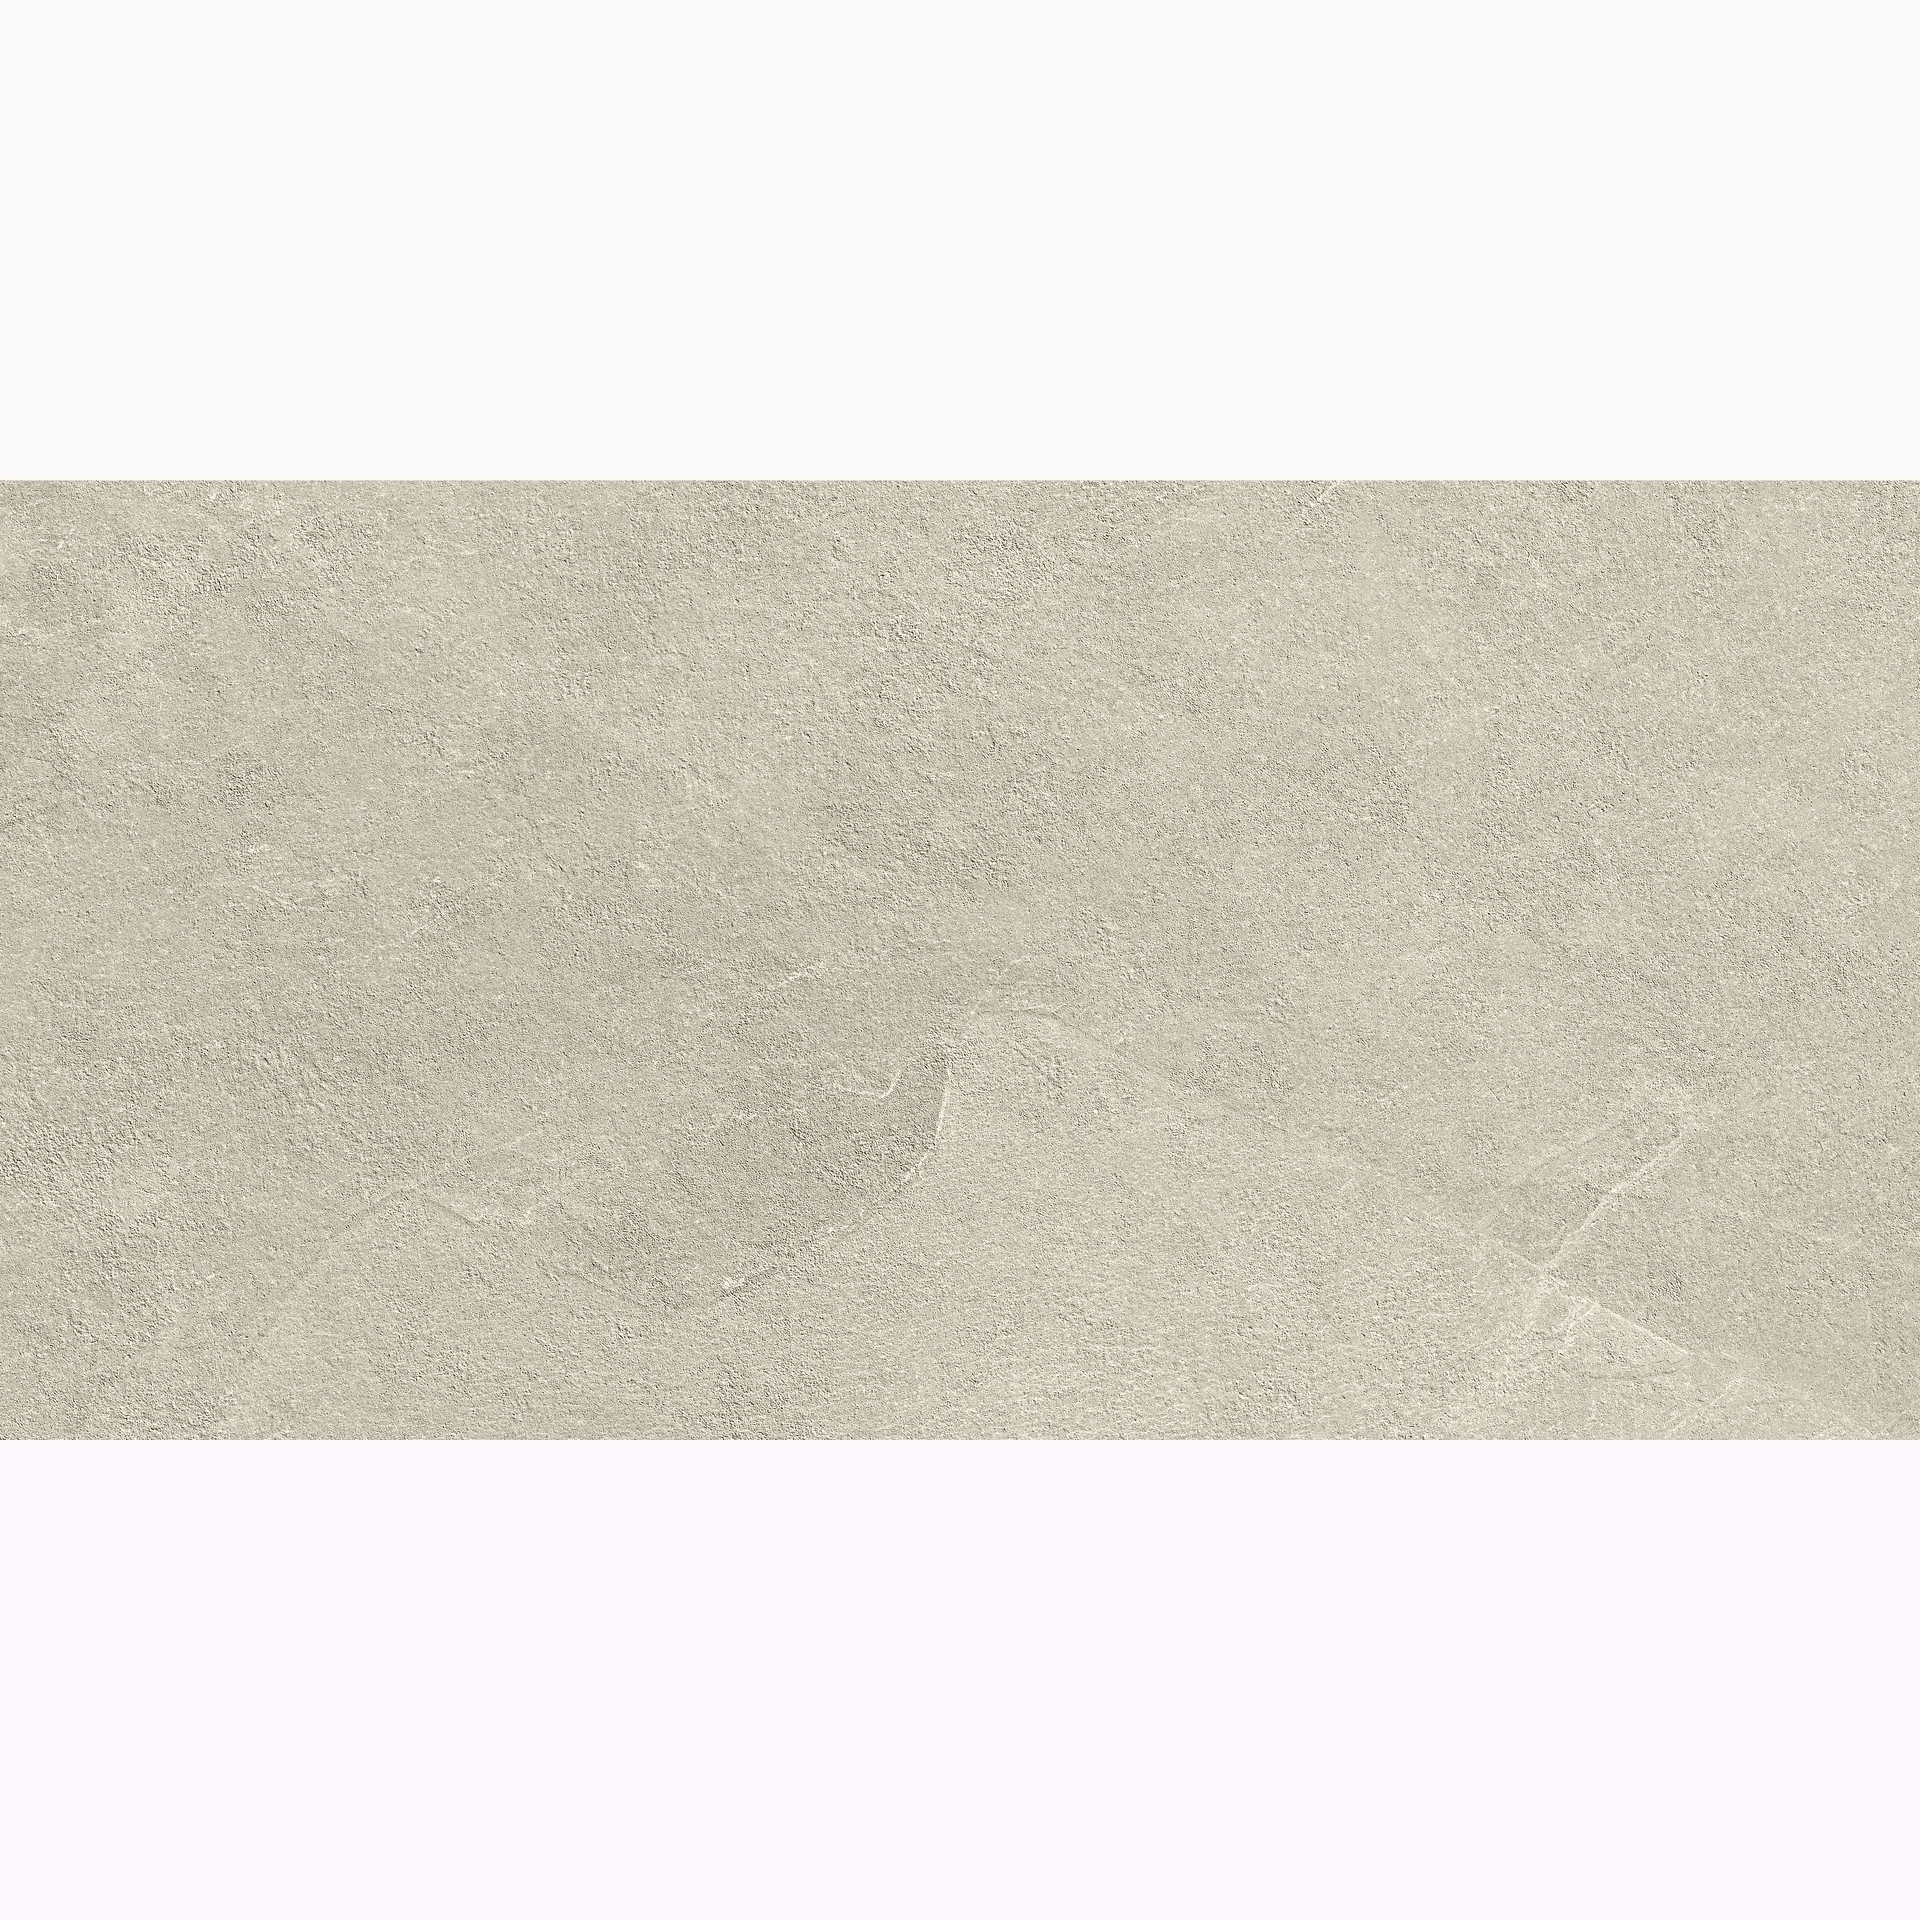 Panaria Zero.3 Stone Trace Glade Antibacterial - Naturale PZXST30 60x120cm rectified 6mm